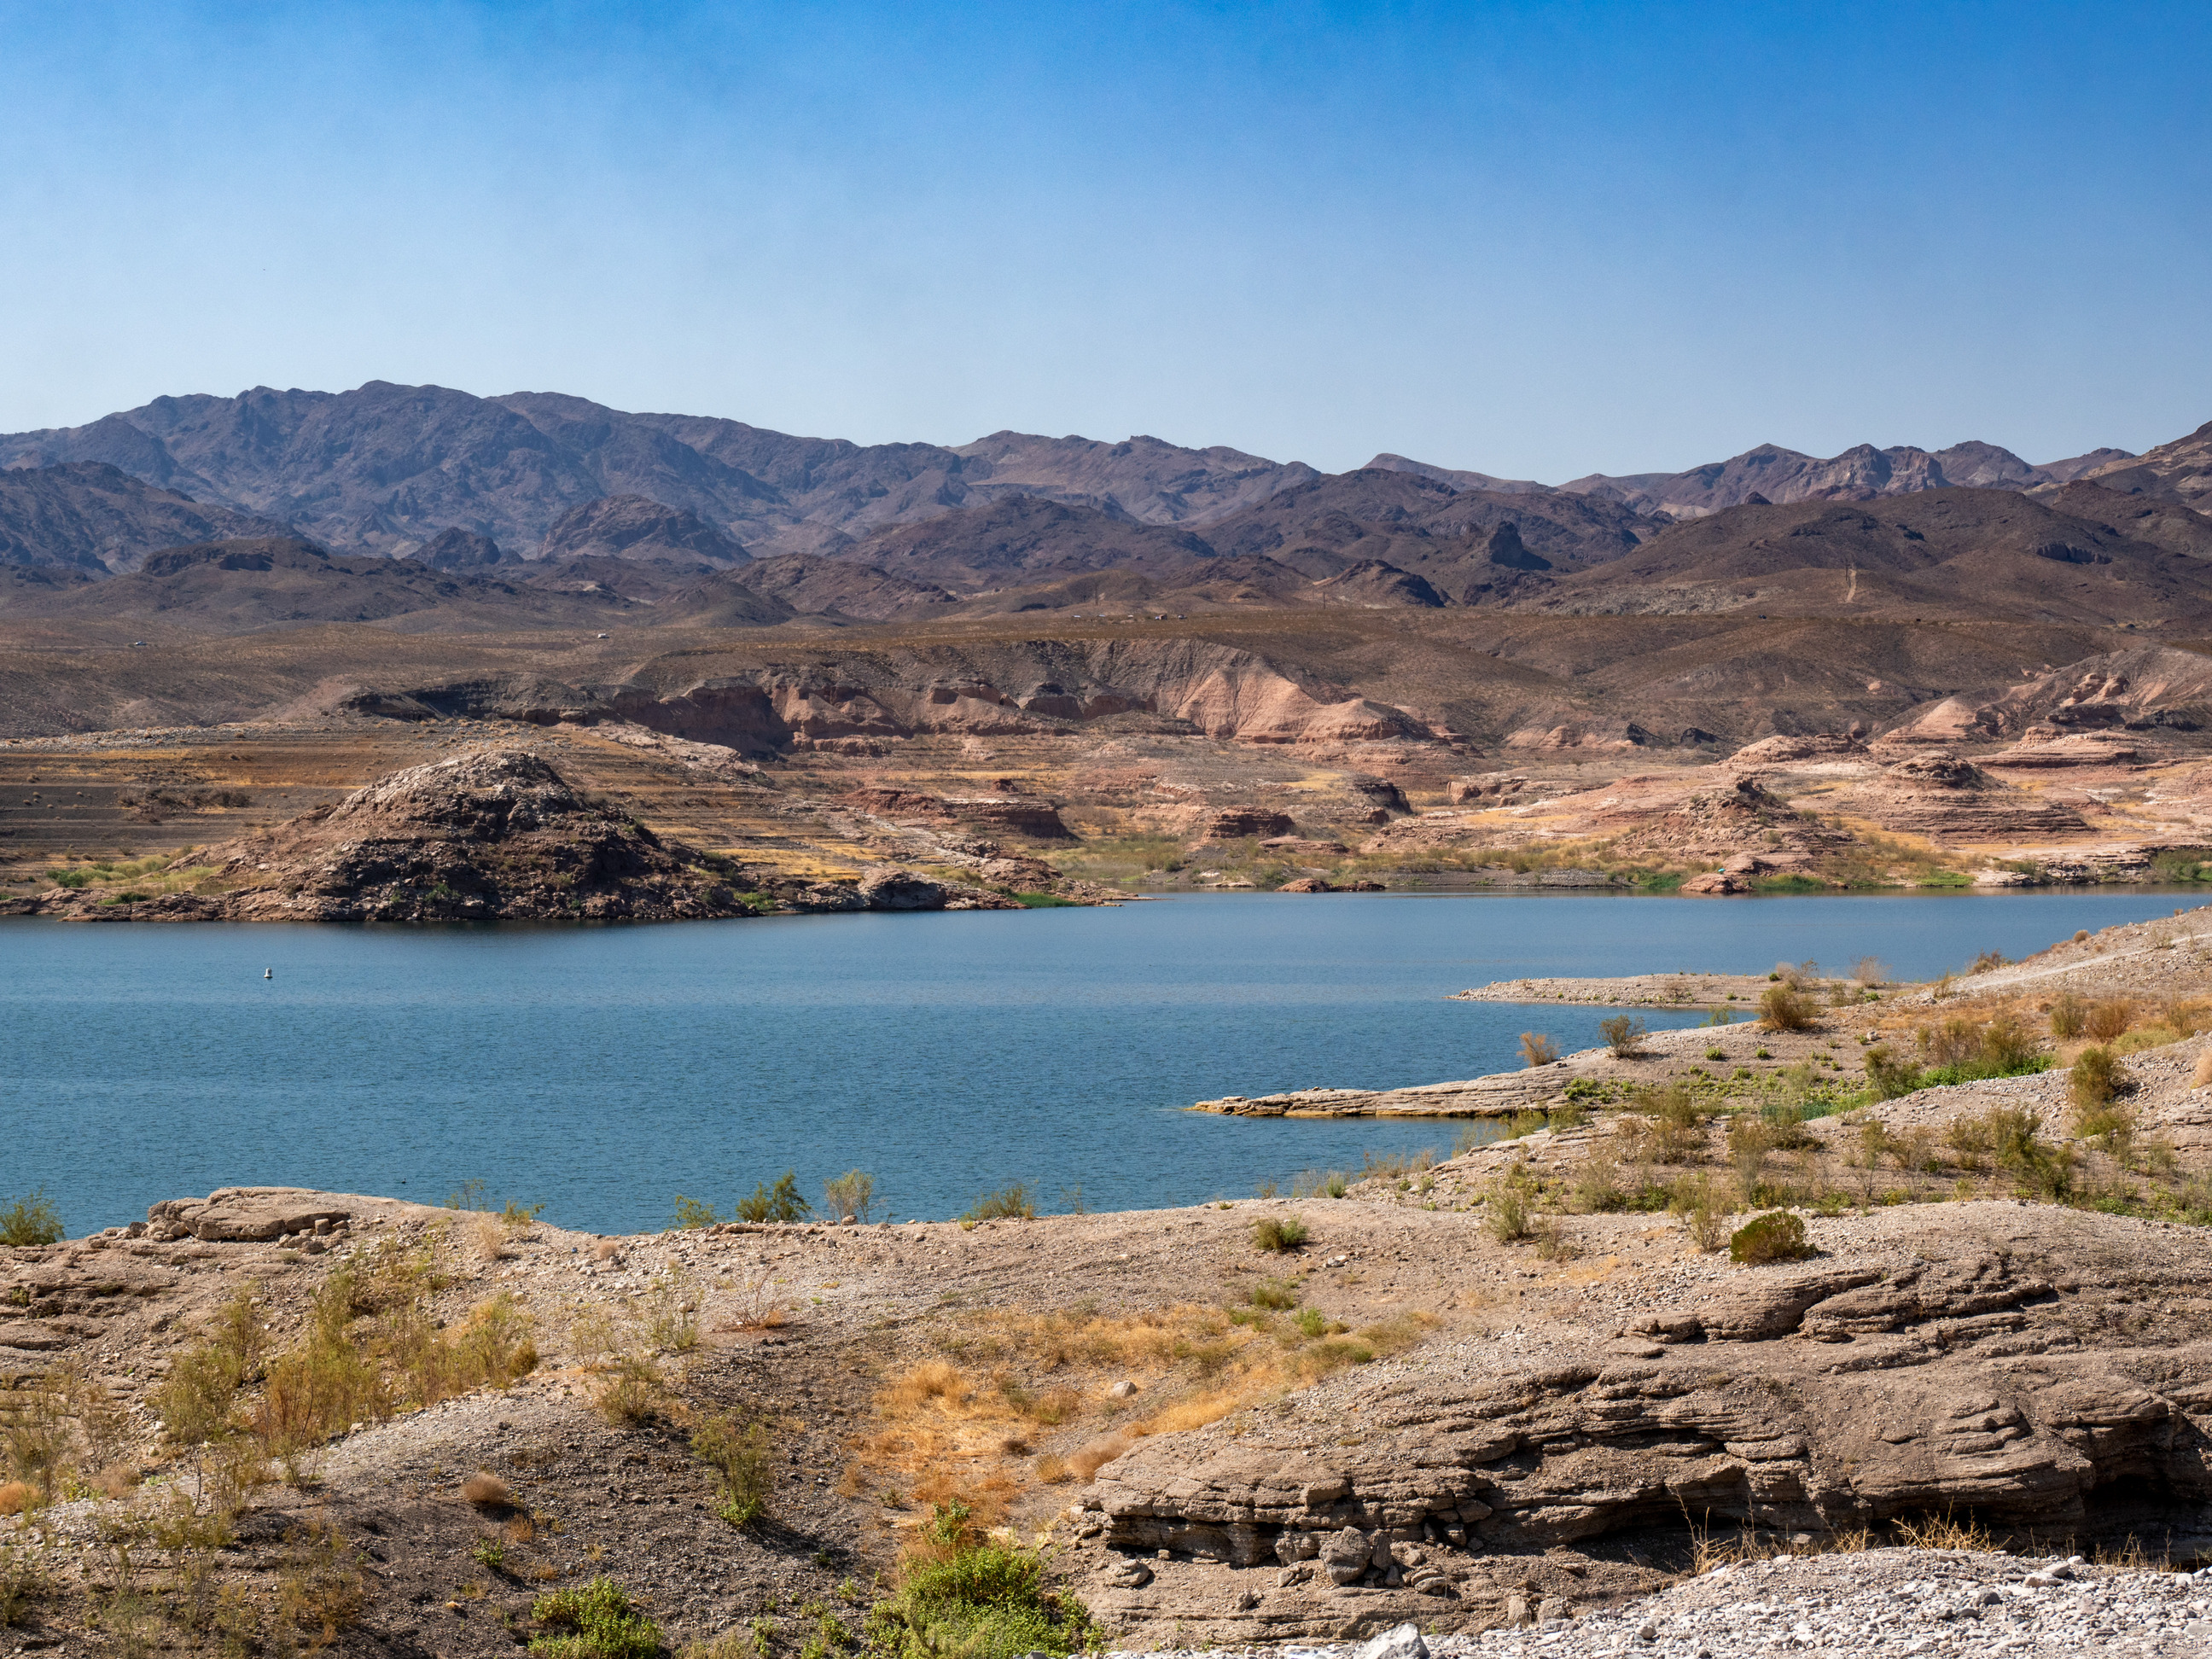 desert with bushes foreground, lake midground, mountains and hills in distance